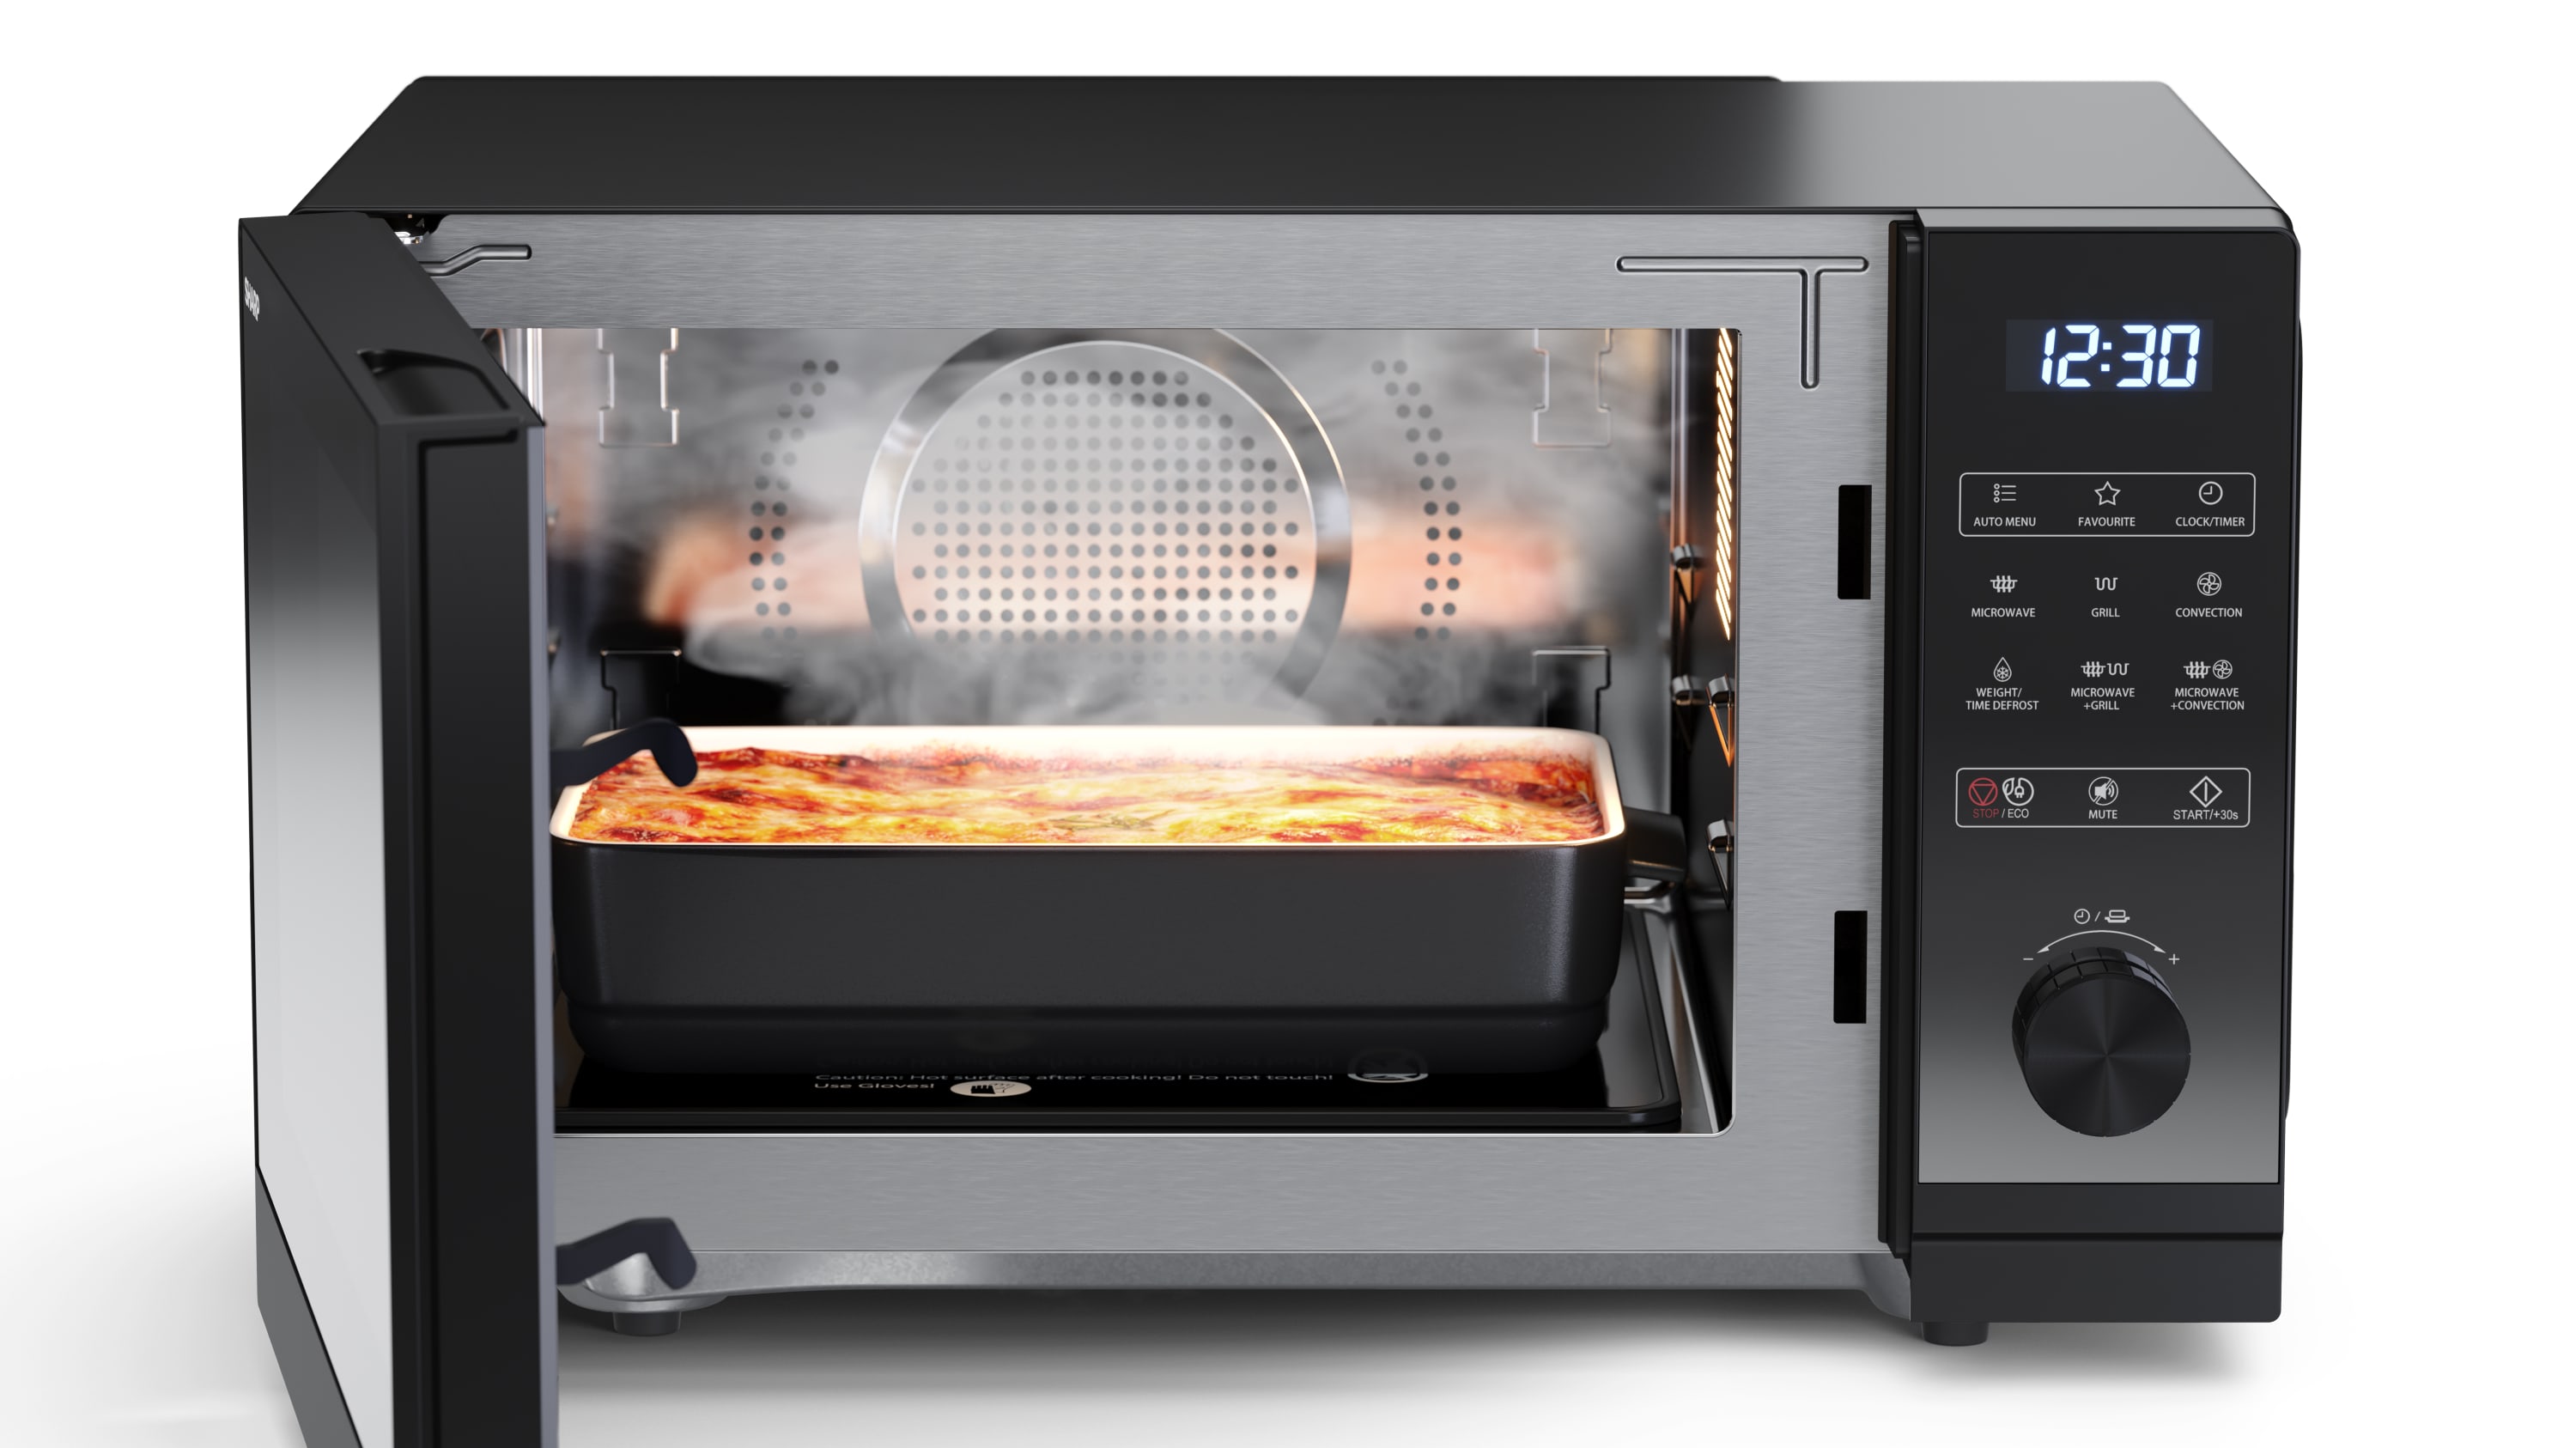 25 Litre Microwave Oven with Grill and Convection - YC-GC52FE-B